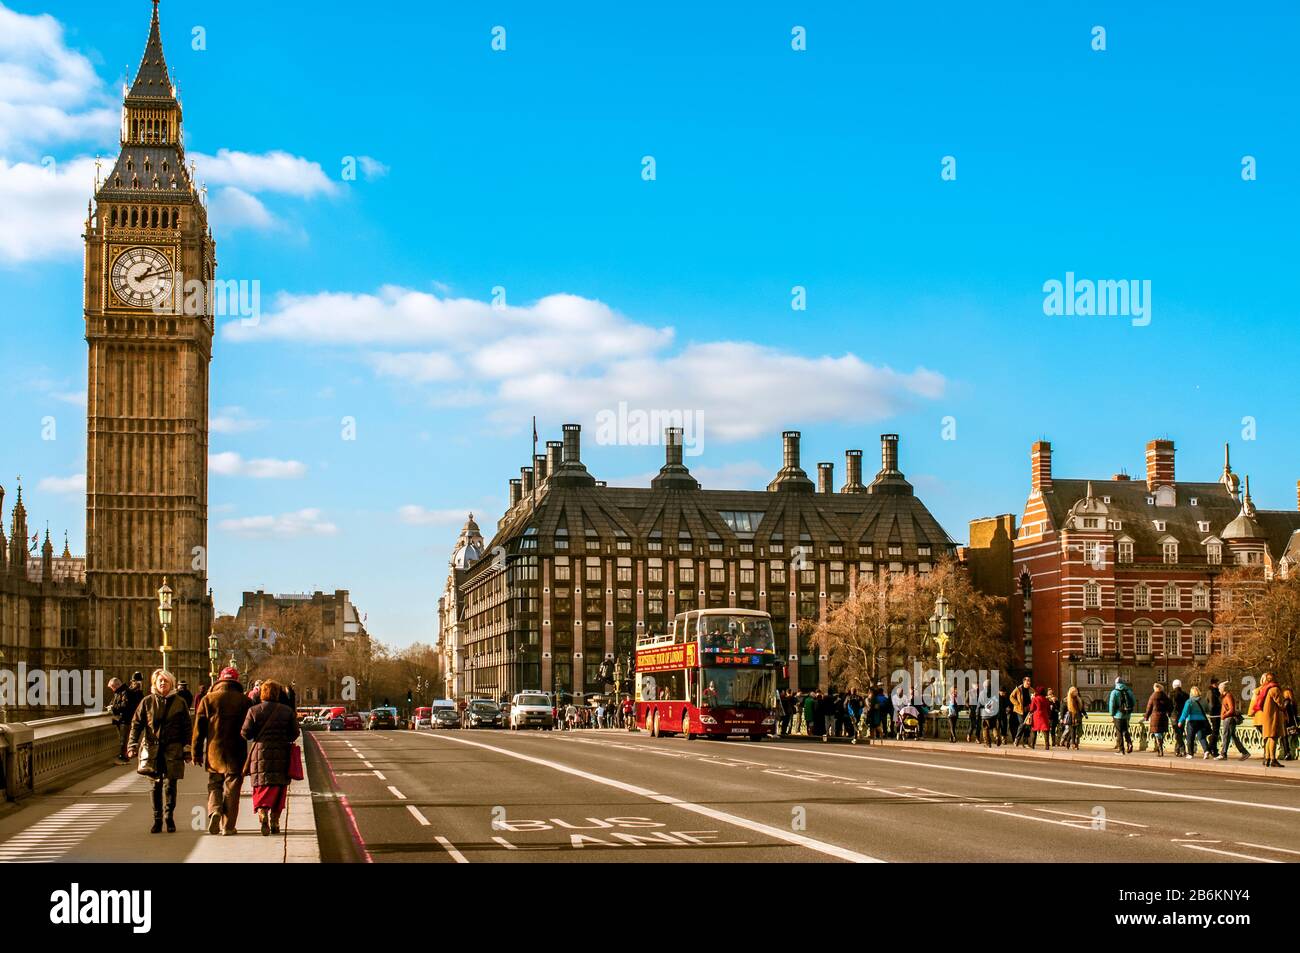 LONDON, UK - JANUARY 19: A view of the Big Ben from Westminster Bridge on January 19, 2015 in London, United Kingdom. Thousands of people cross this b Stock Photo